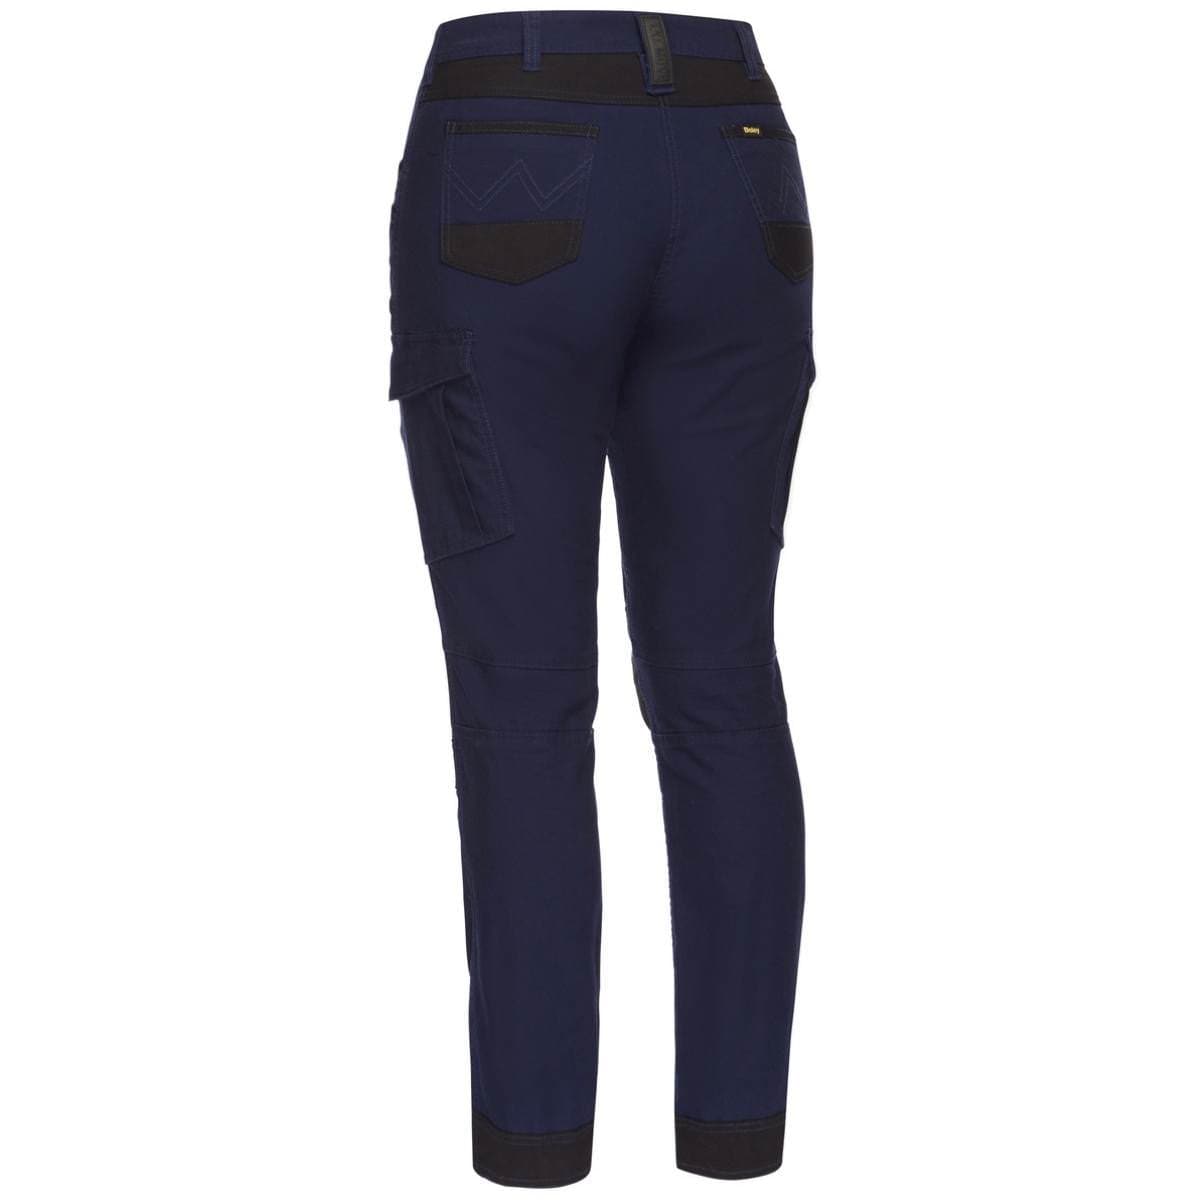 Womens Flx & Move Jegging - BPL6026